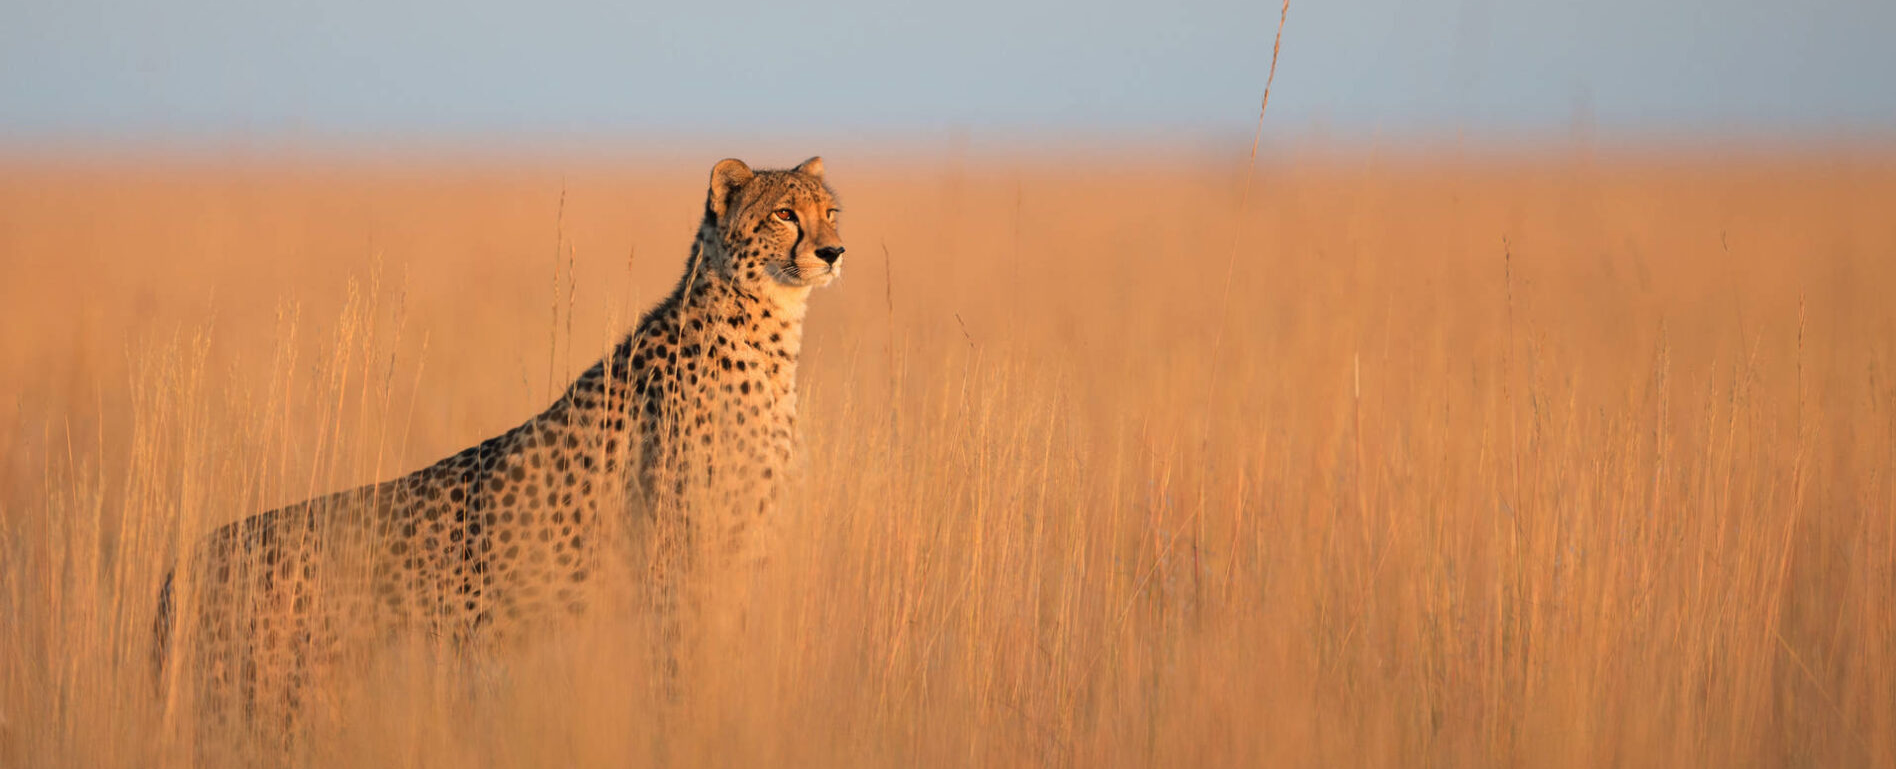 Cheetah standing in the high yellow grass in the sunlight